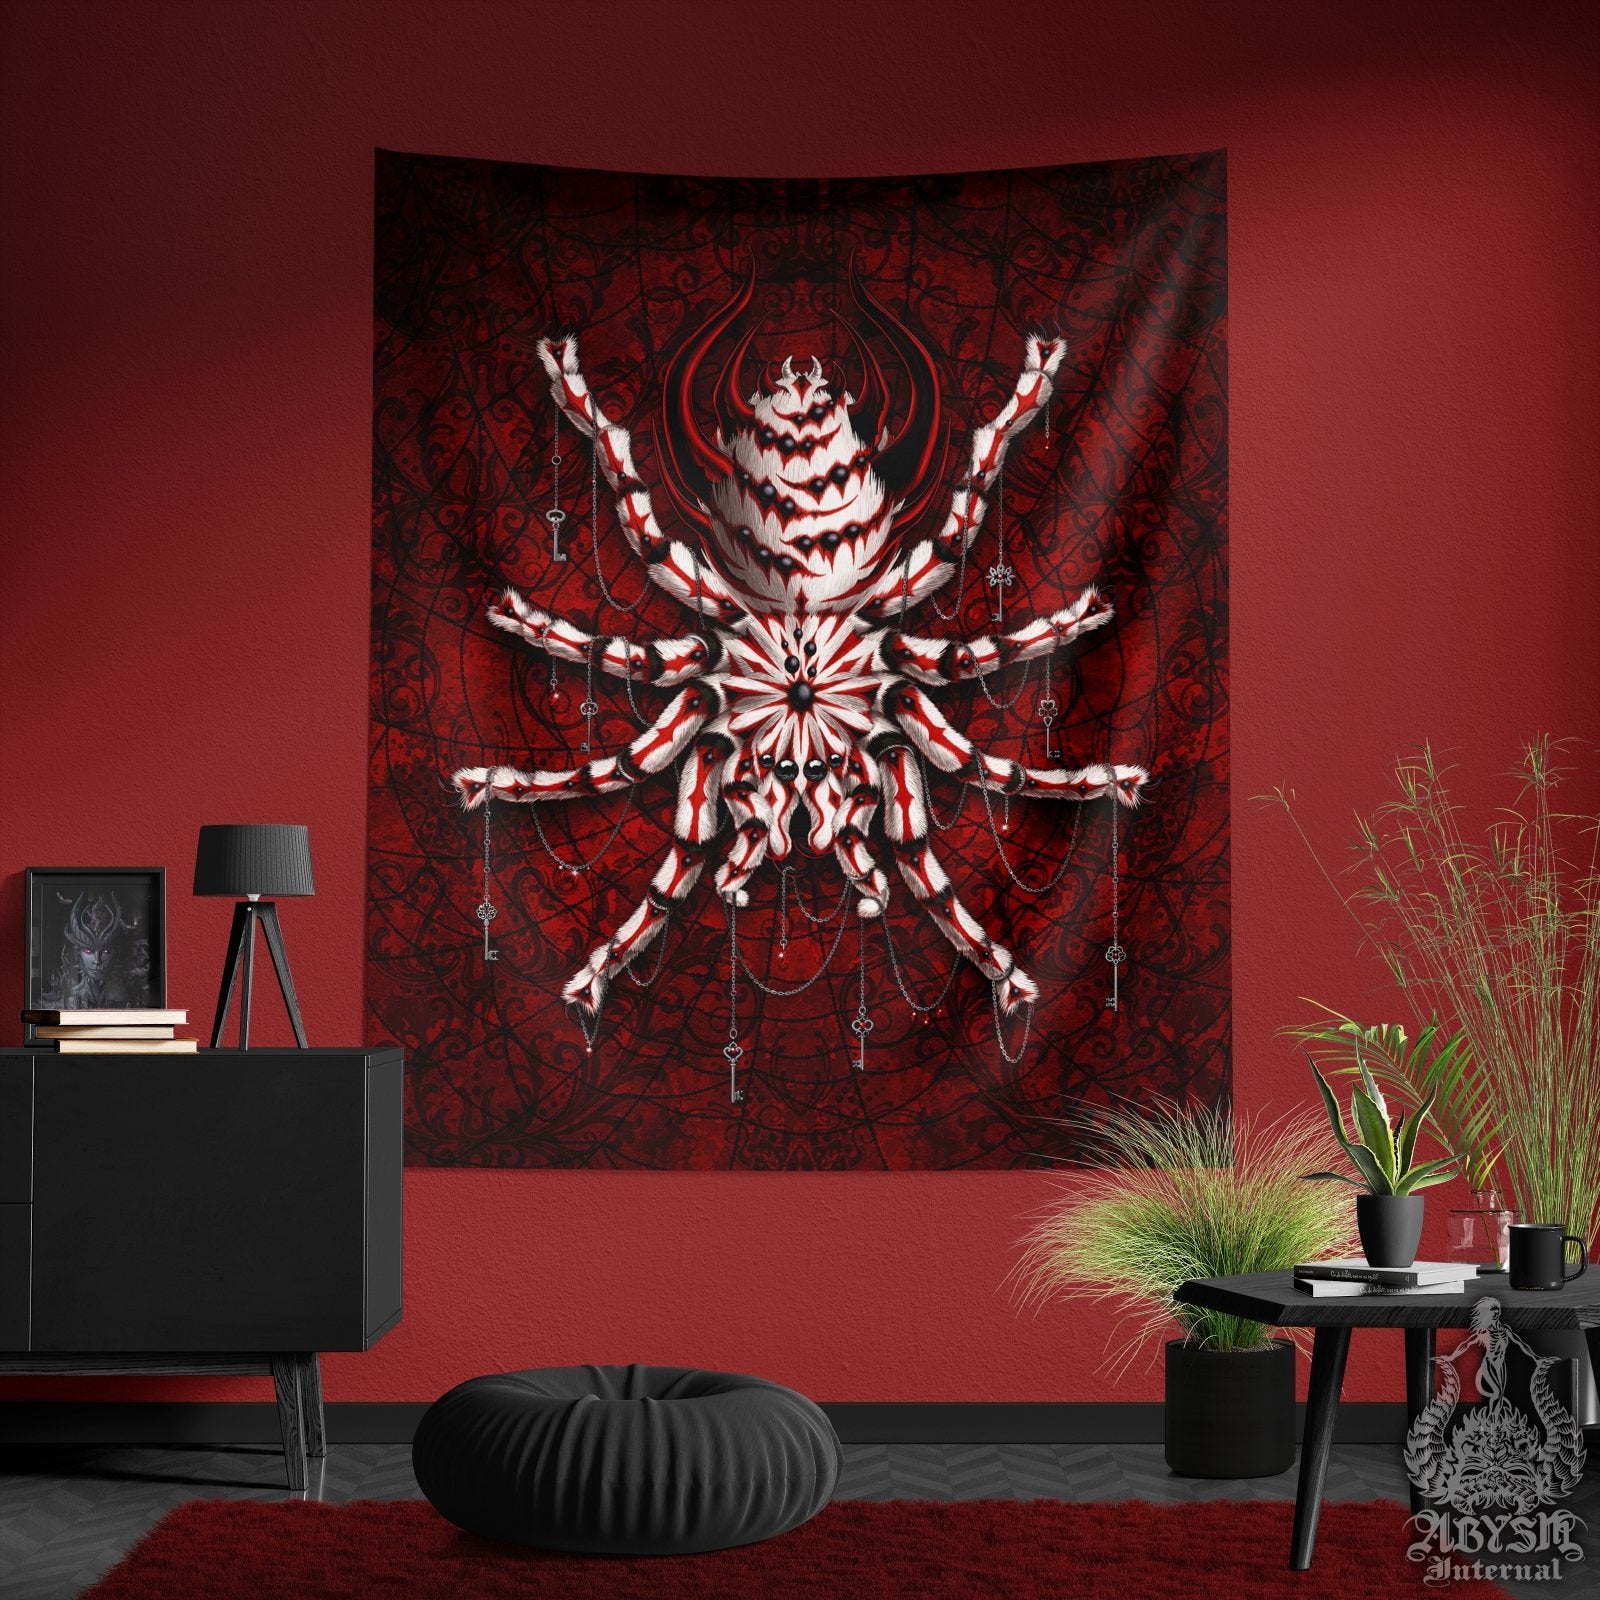 Gothic Tapestry, Spider Wall Hanging, Goth Home Decor, Tarantula Art Print - Bloody White - Abysm Internal